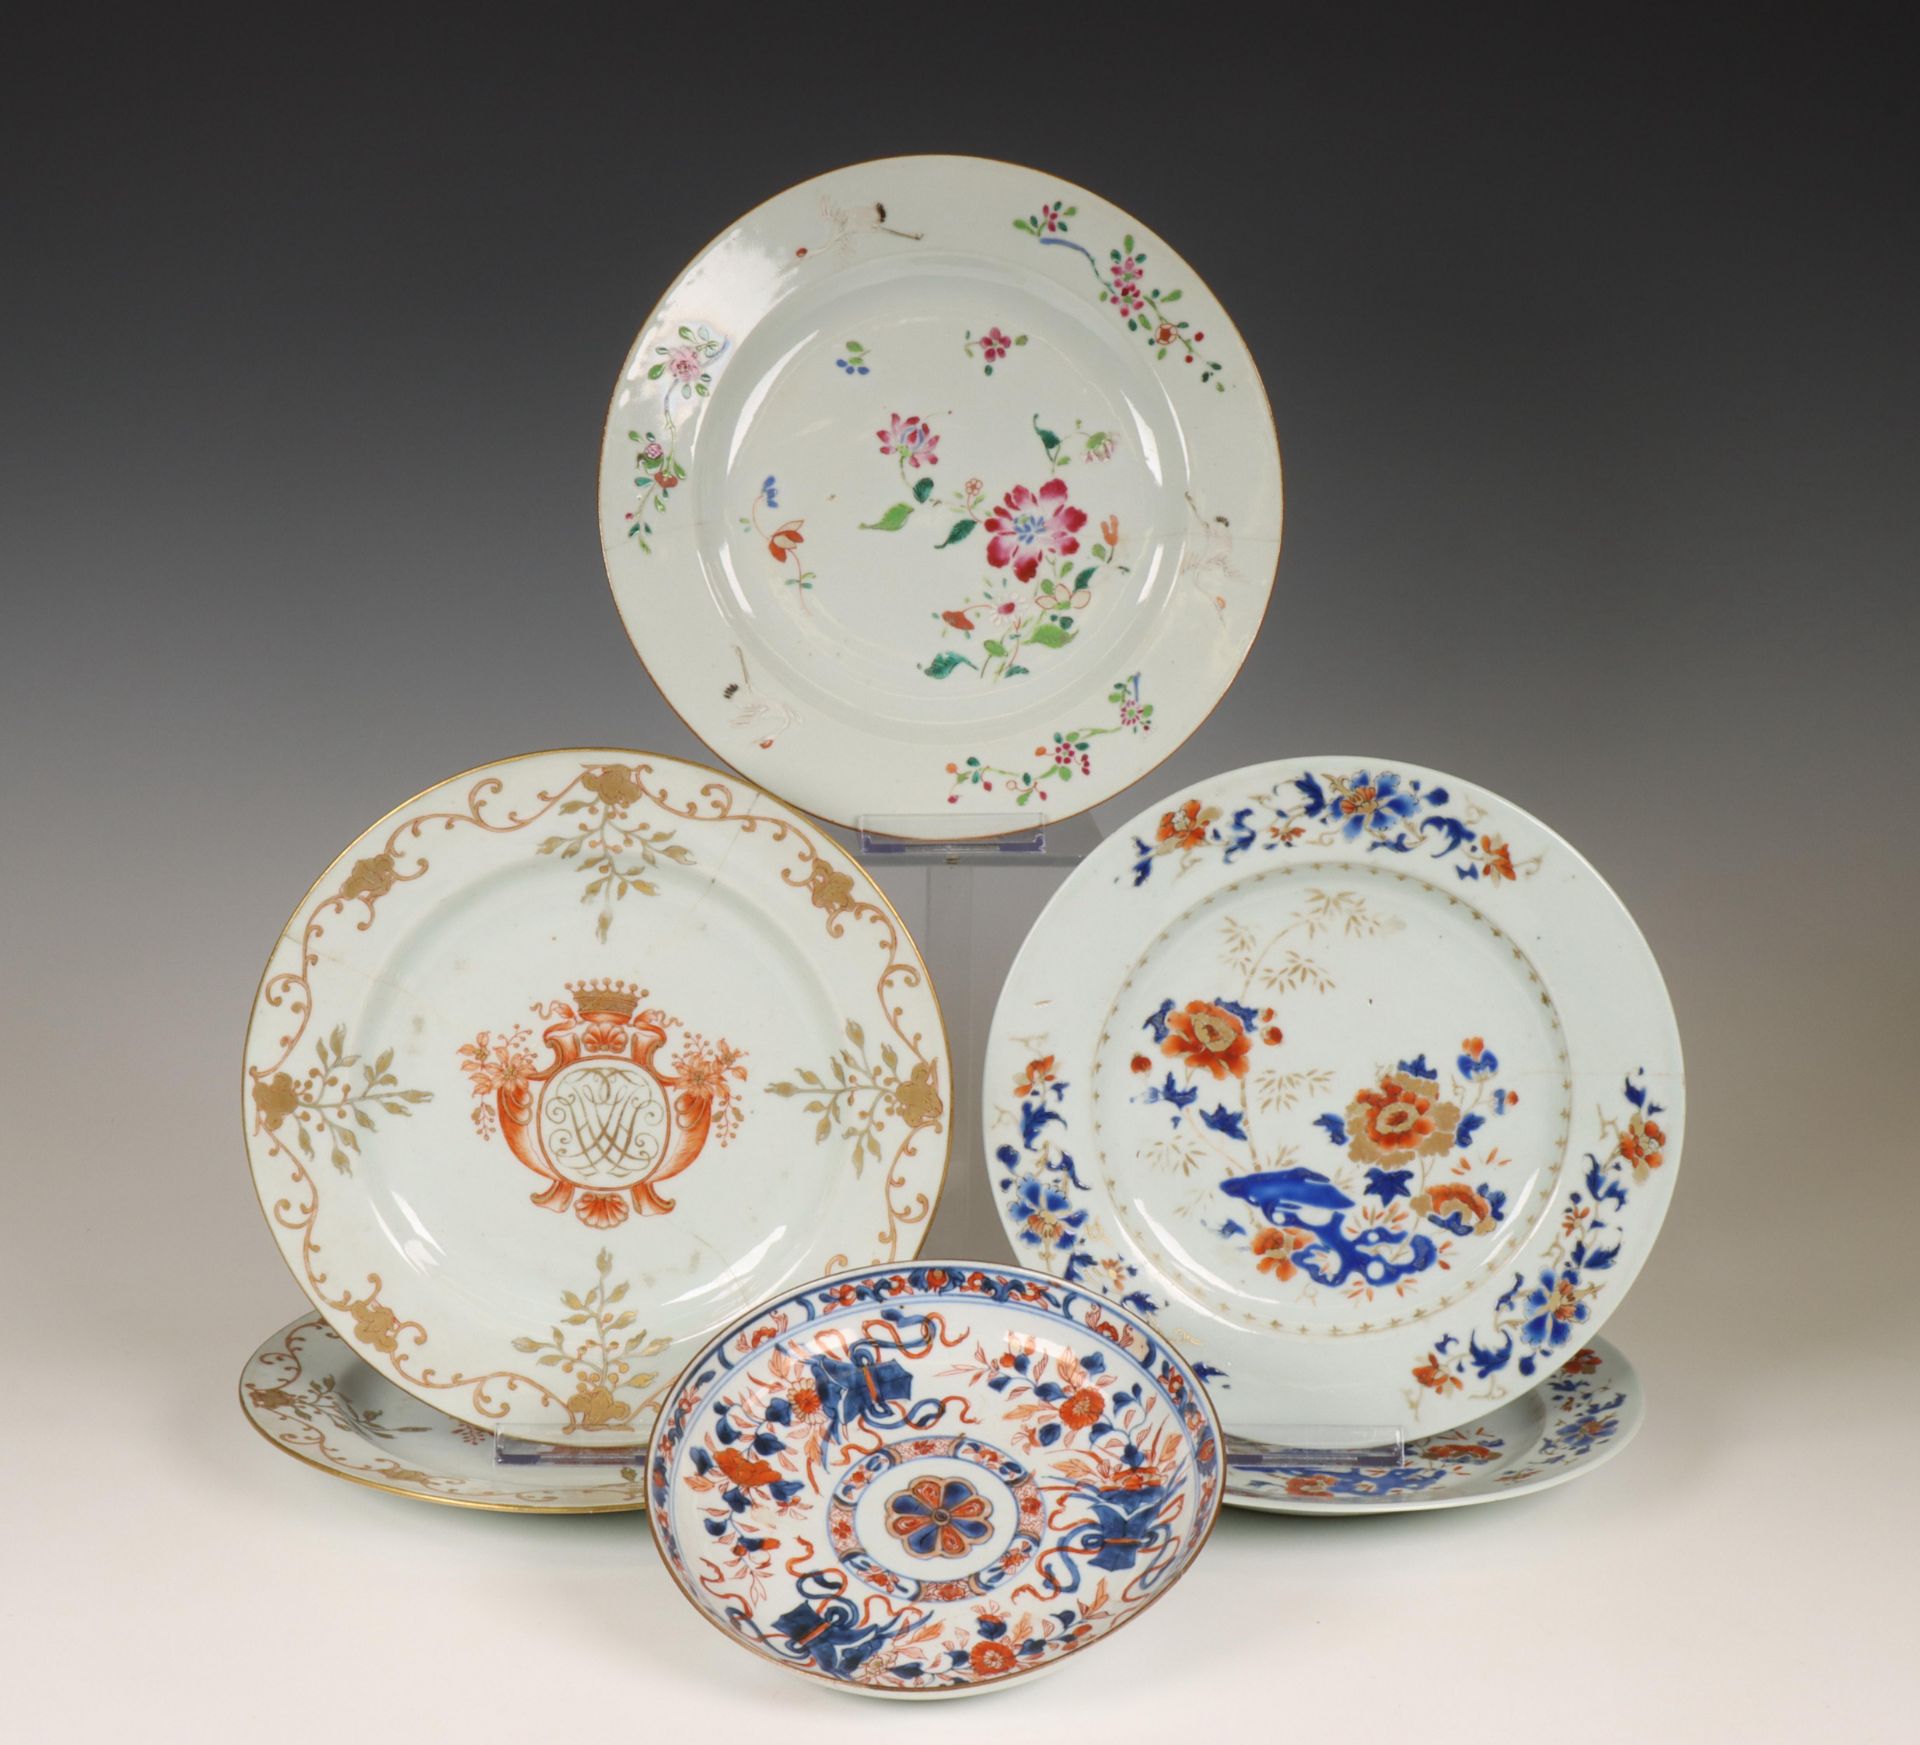 China, small collection of porcelain plates, 18th century, - Image 3 of 3